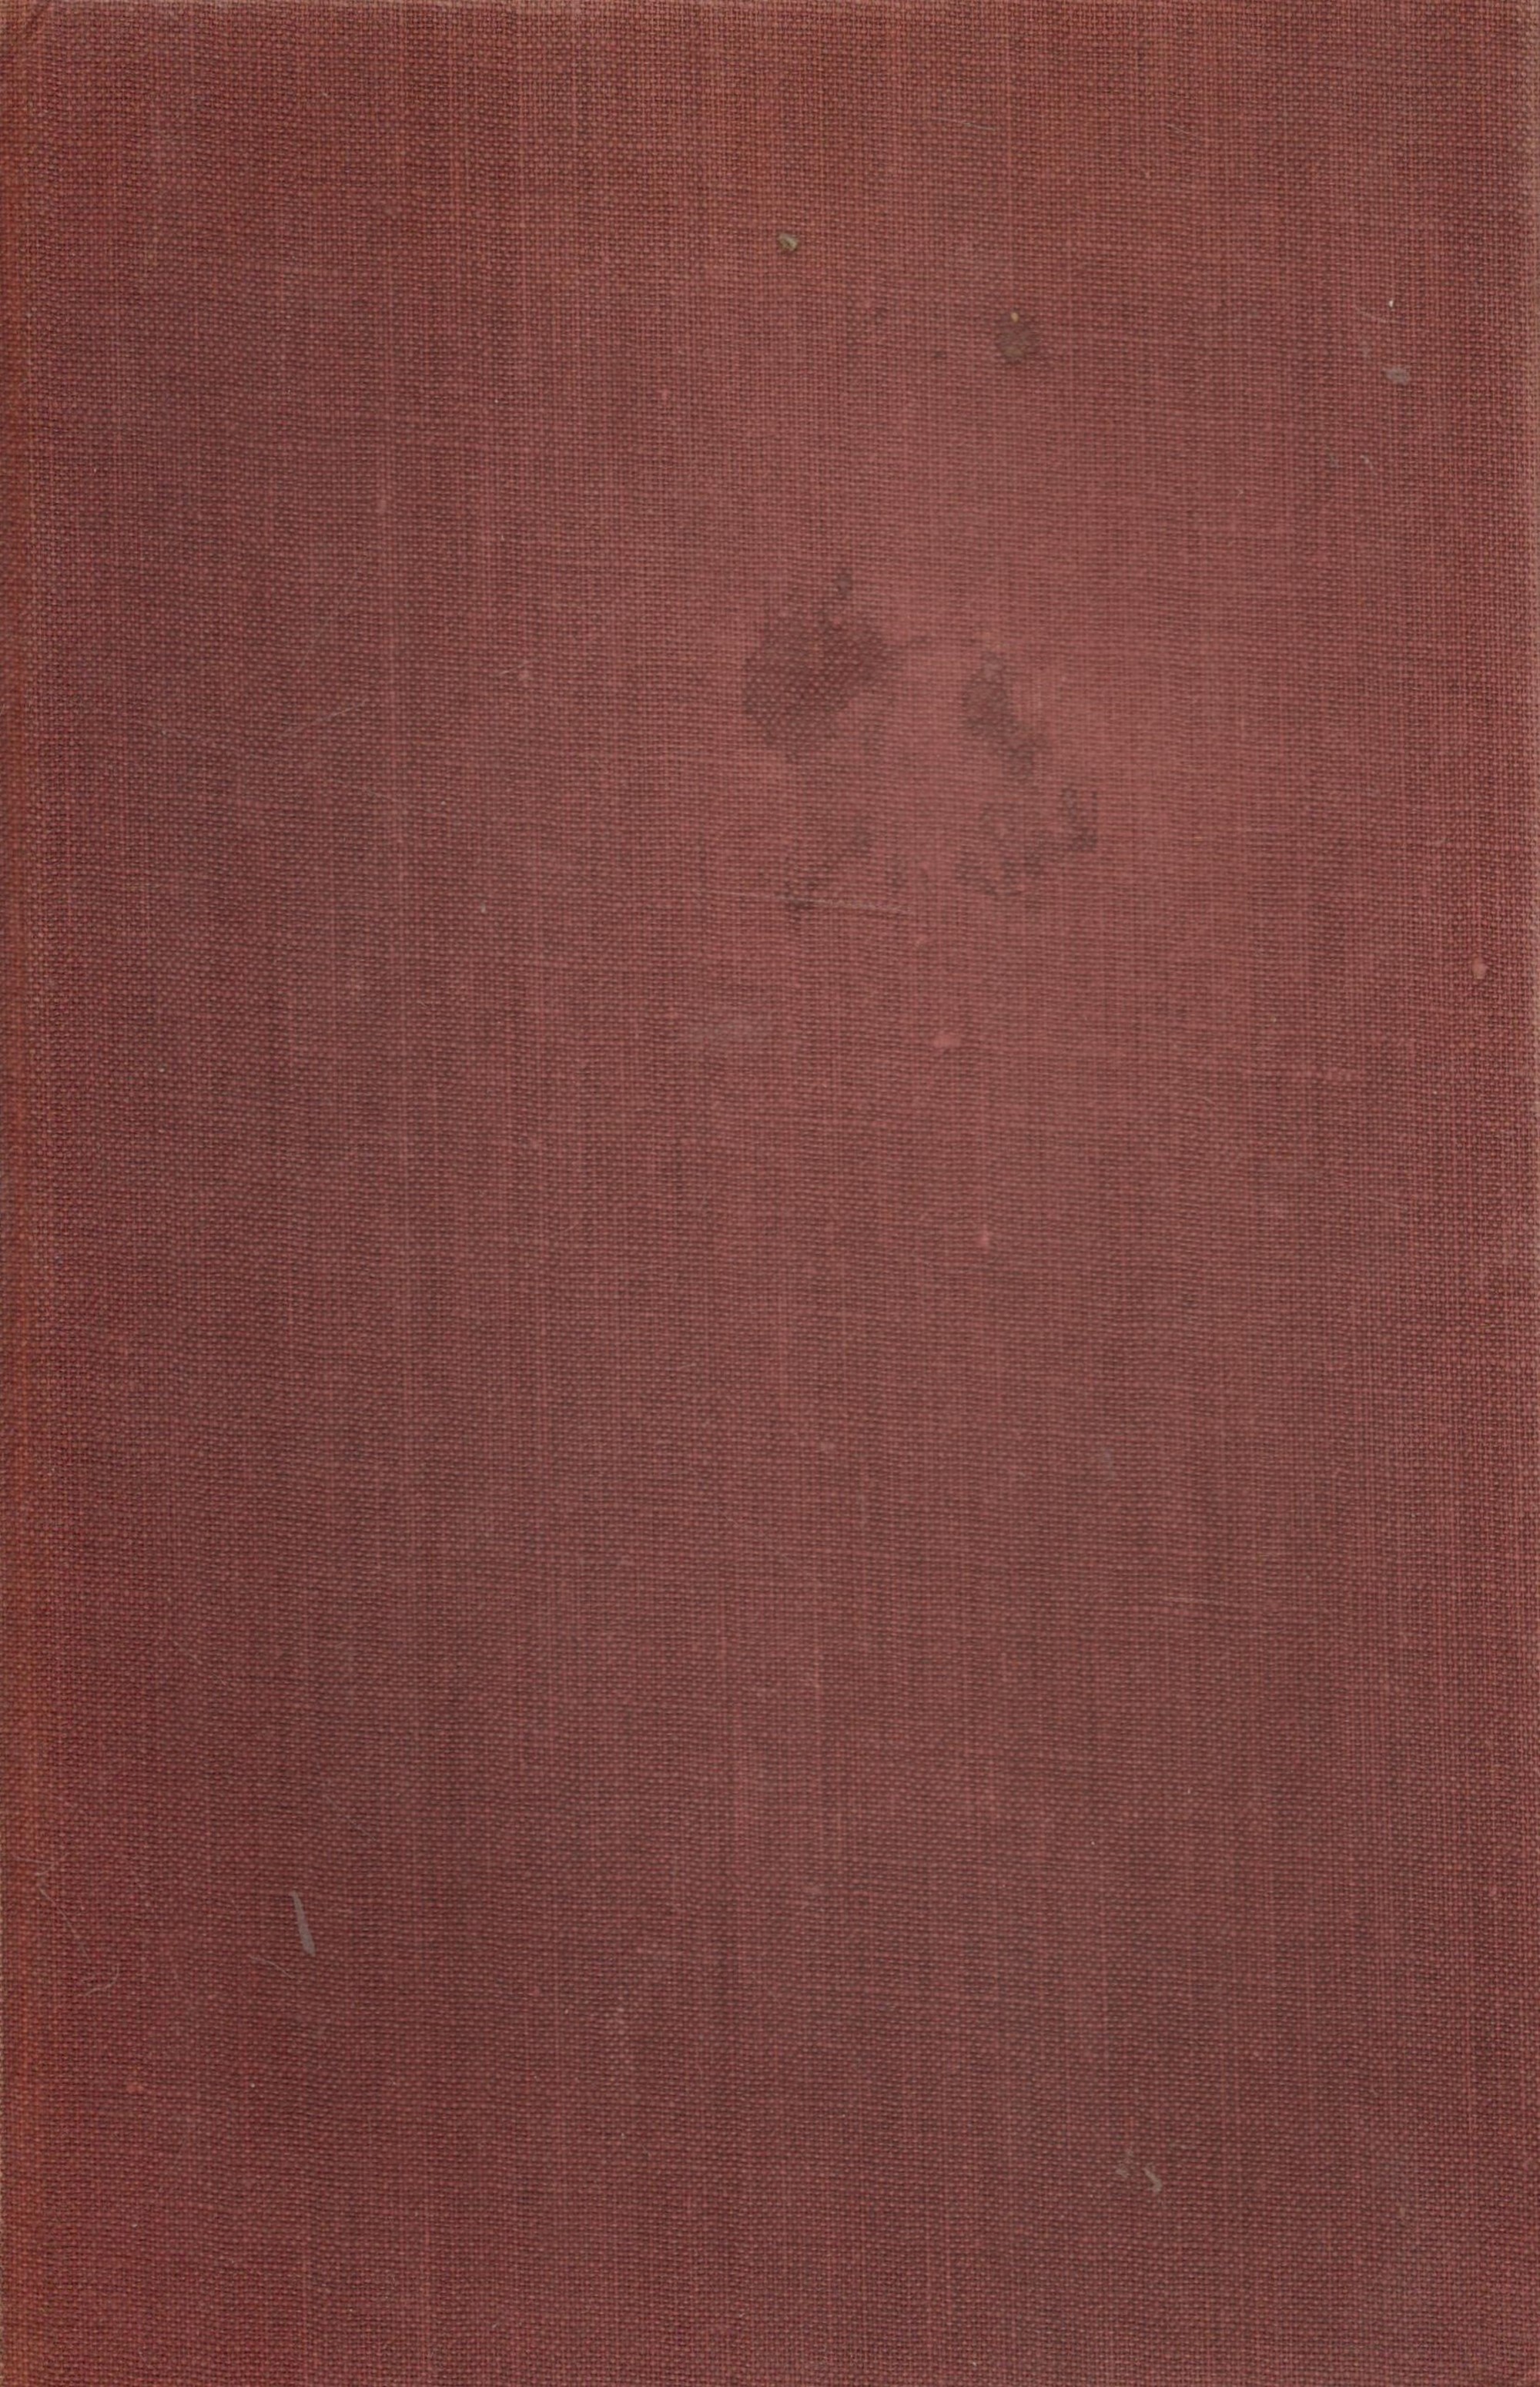 Emlyn Williams by Richard Findlater 1956 with an unknown signature dated April 1957. Showing signs